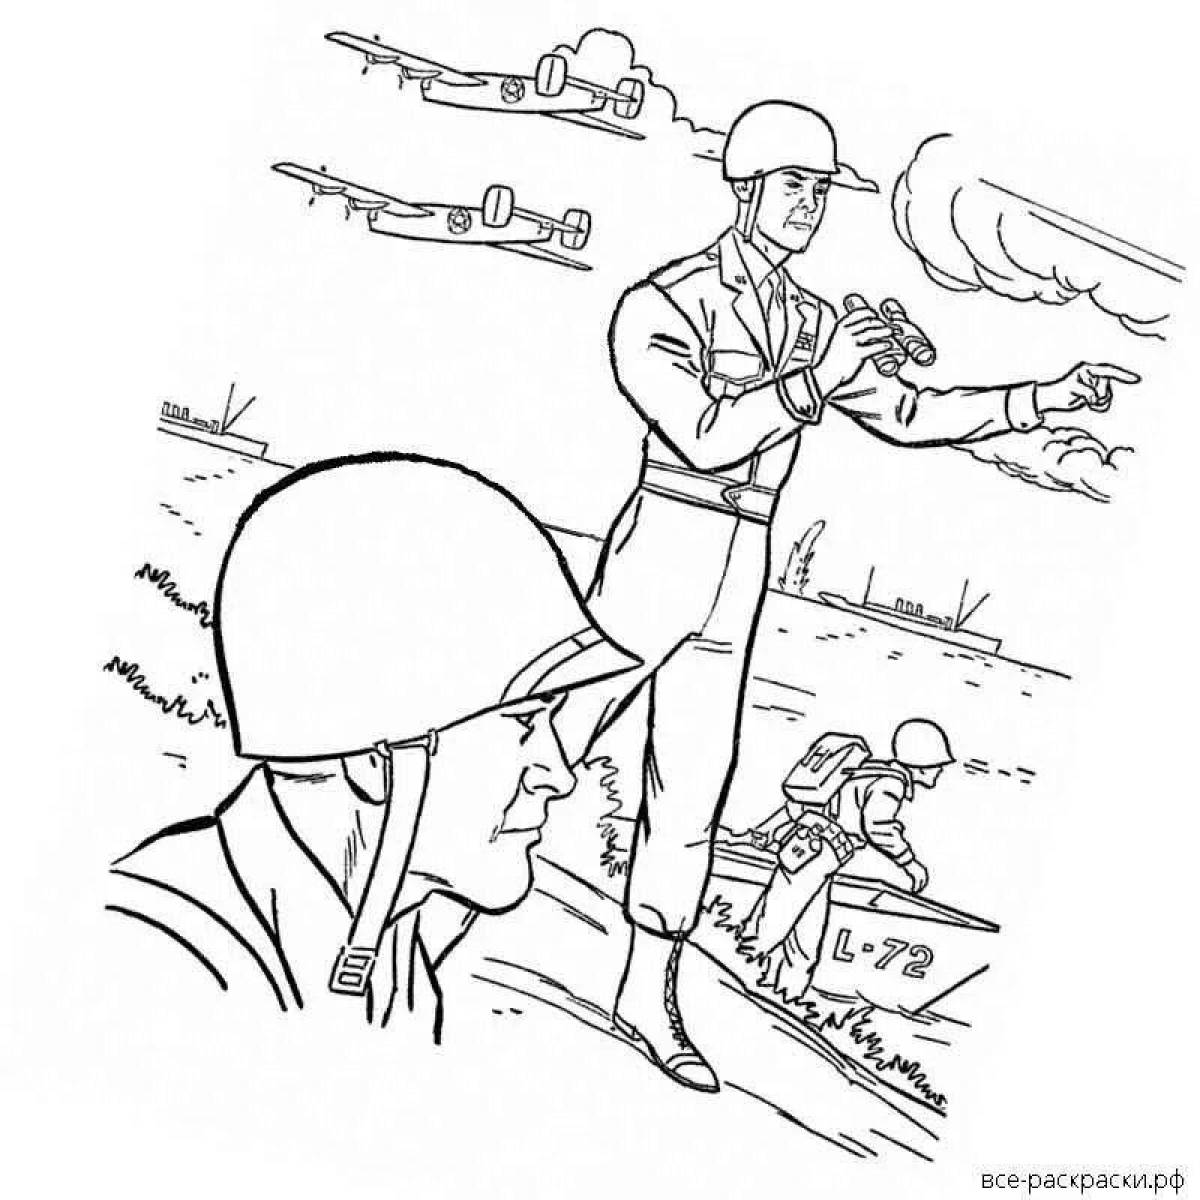 Cold war coloring page